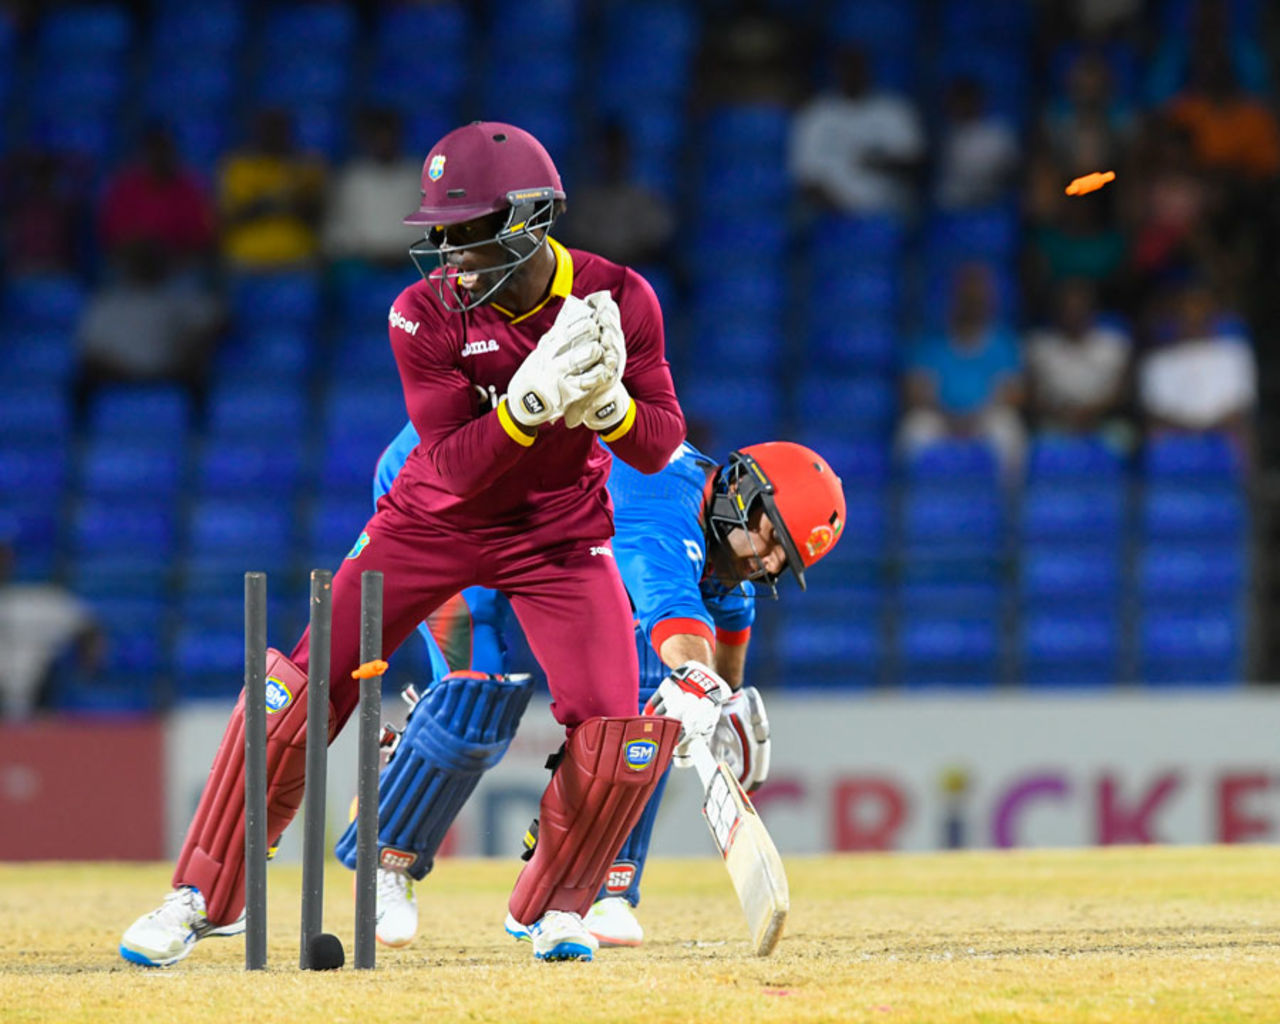 Chadwick Walton whips off the bails to run out Mohammad Nabi, West Indies v Afghanistan, 2nd T20I, St Kitts, June 3, 2017